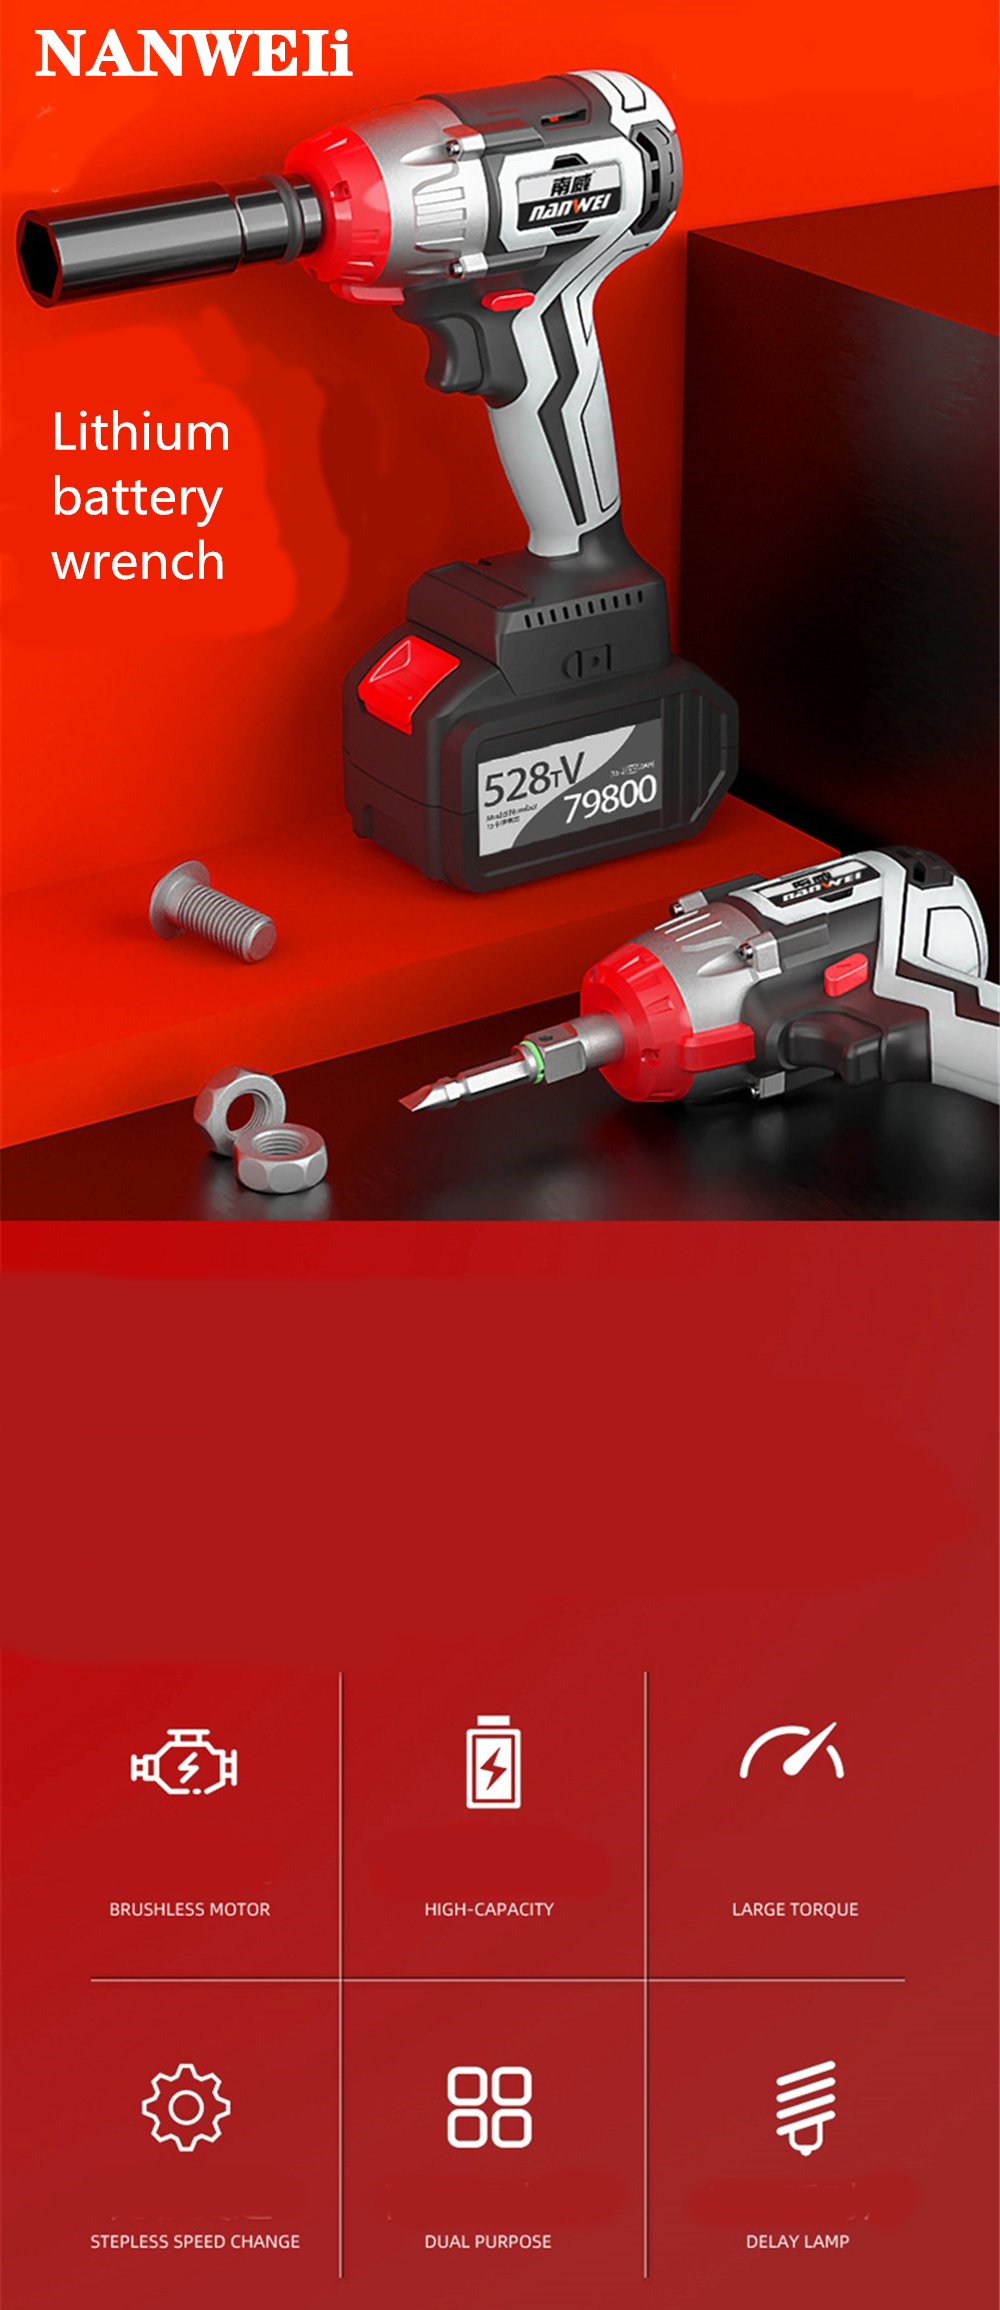 NANWEI-380NM-Brushless-Electric-Impact-Wrench-Adjustable-Speed-Regulation-With-60Ah-Lithium-Battery--1750113-1